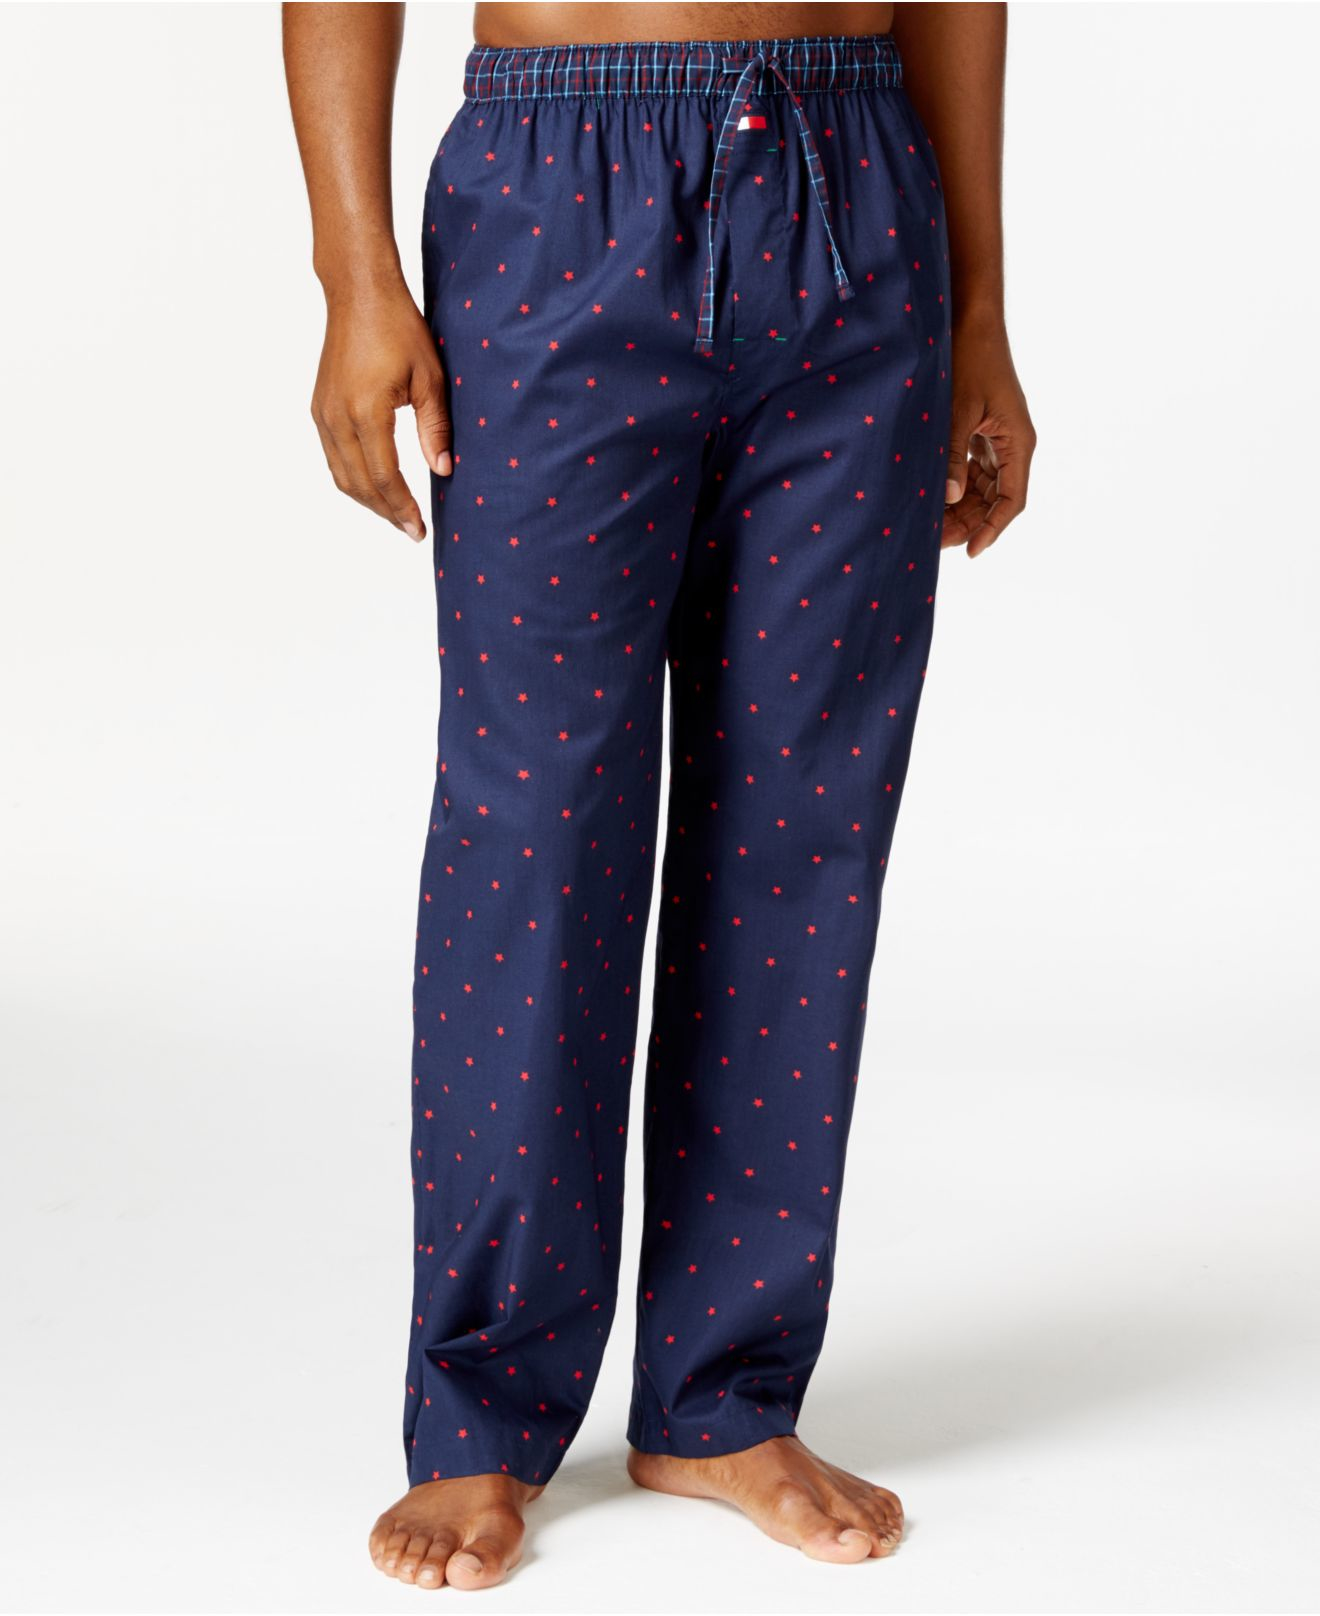 Tommy Hilfiger Woven Patterned Pajama Pants Blue for